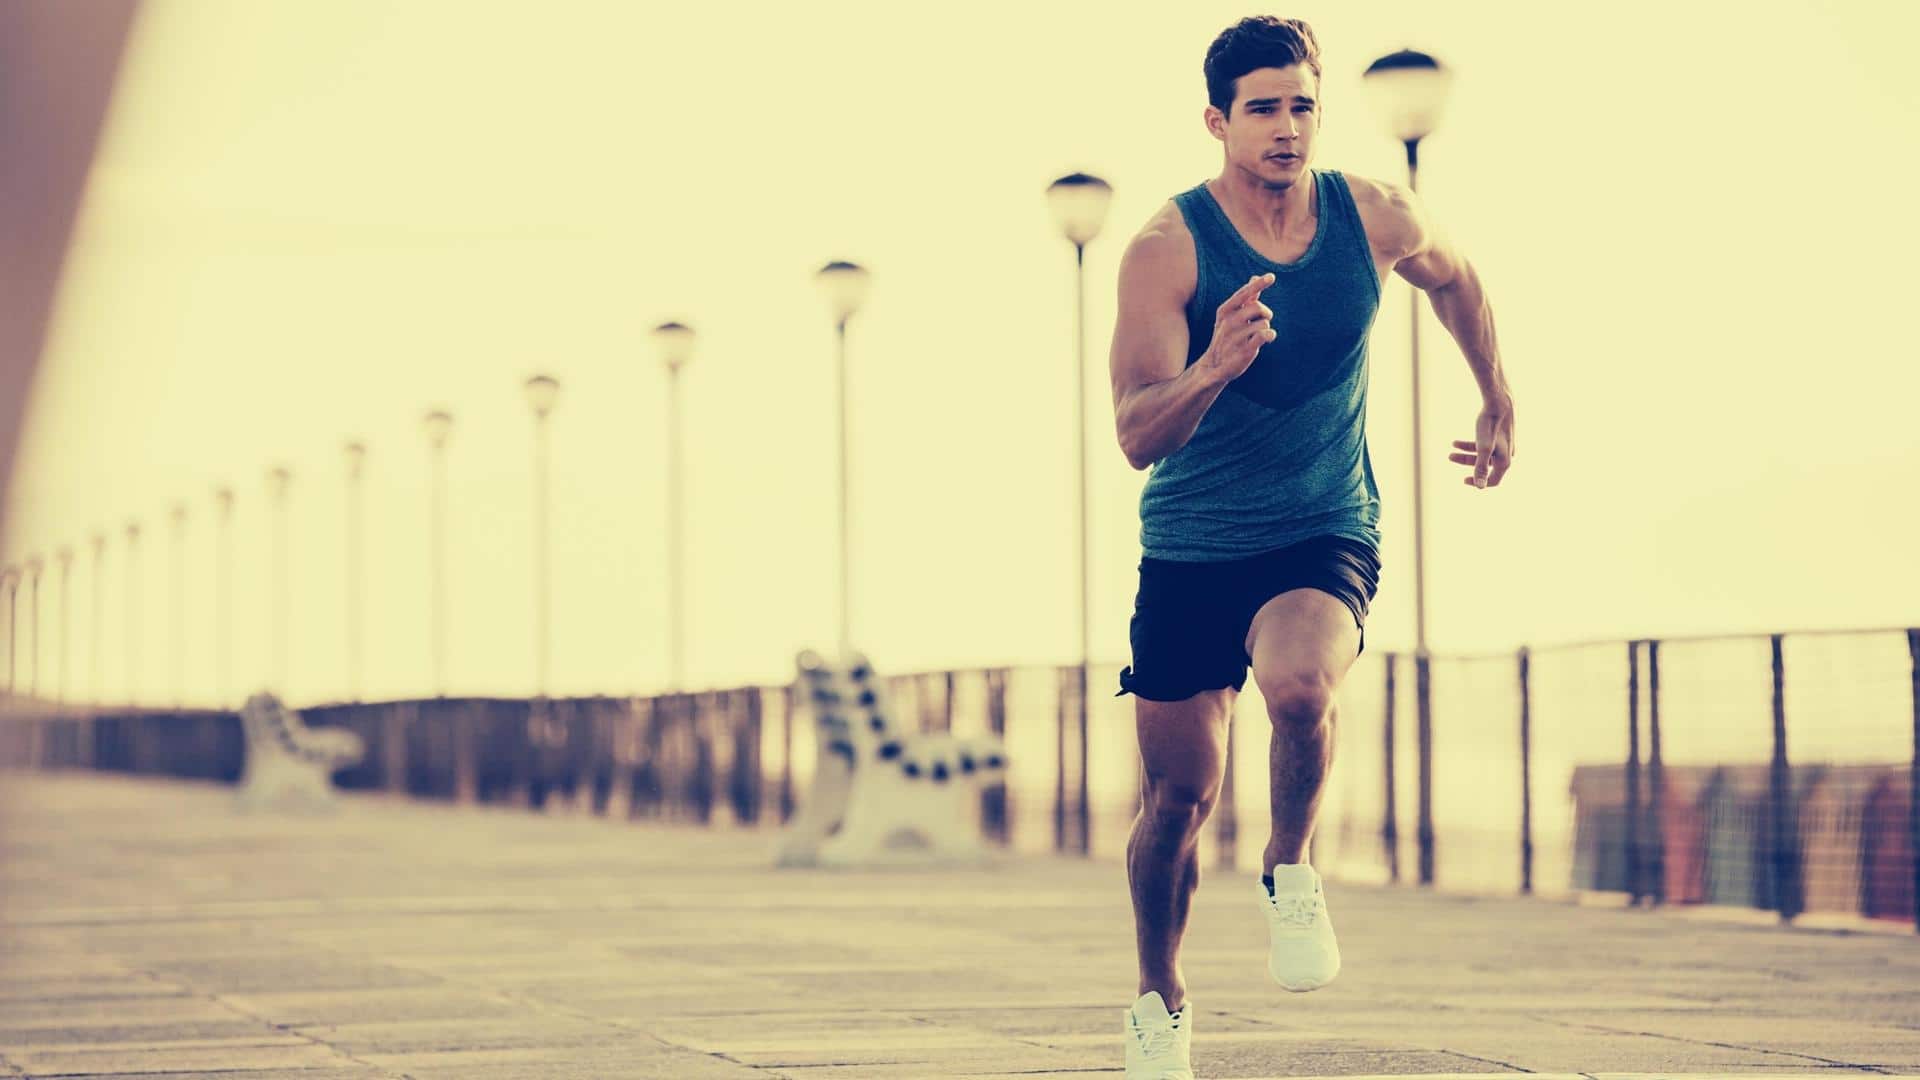 Here are the top 5 health benefits of sprinting